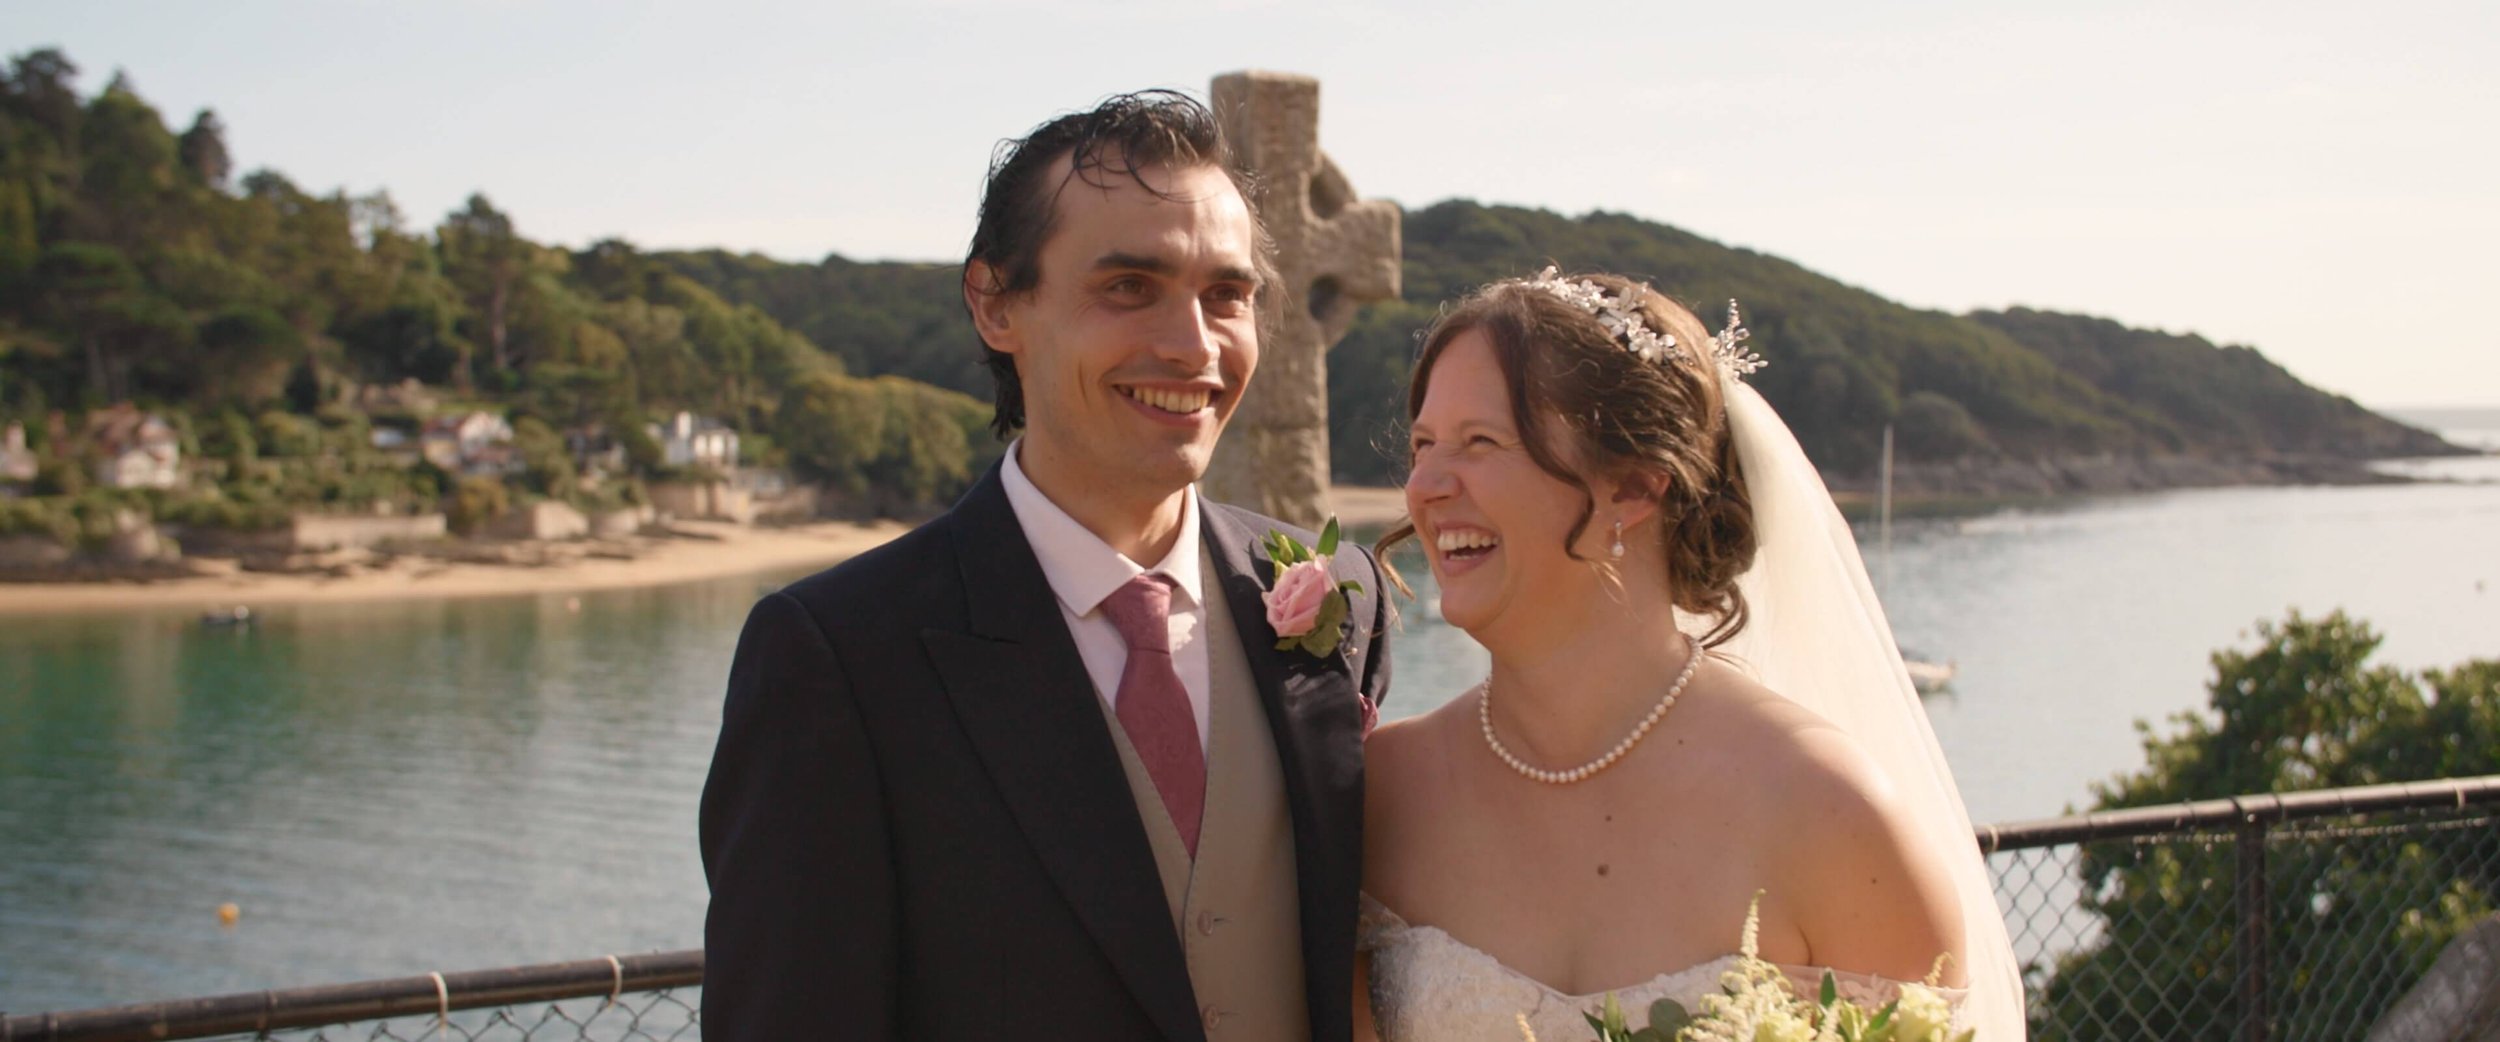 Stephen makes Amy laugh as they stand in front of the Salcombe Estuary in their wedding outfits